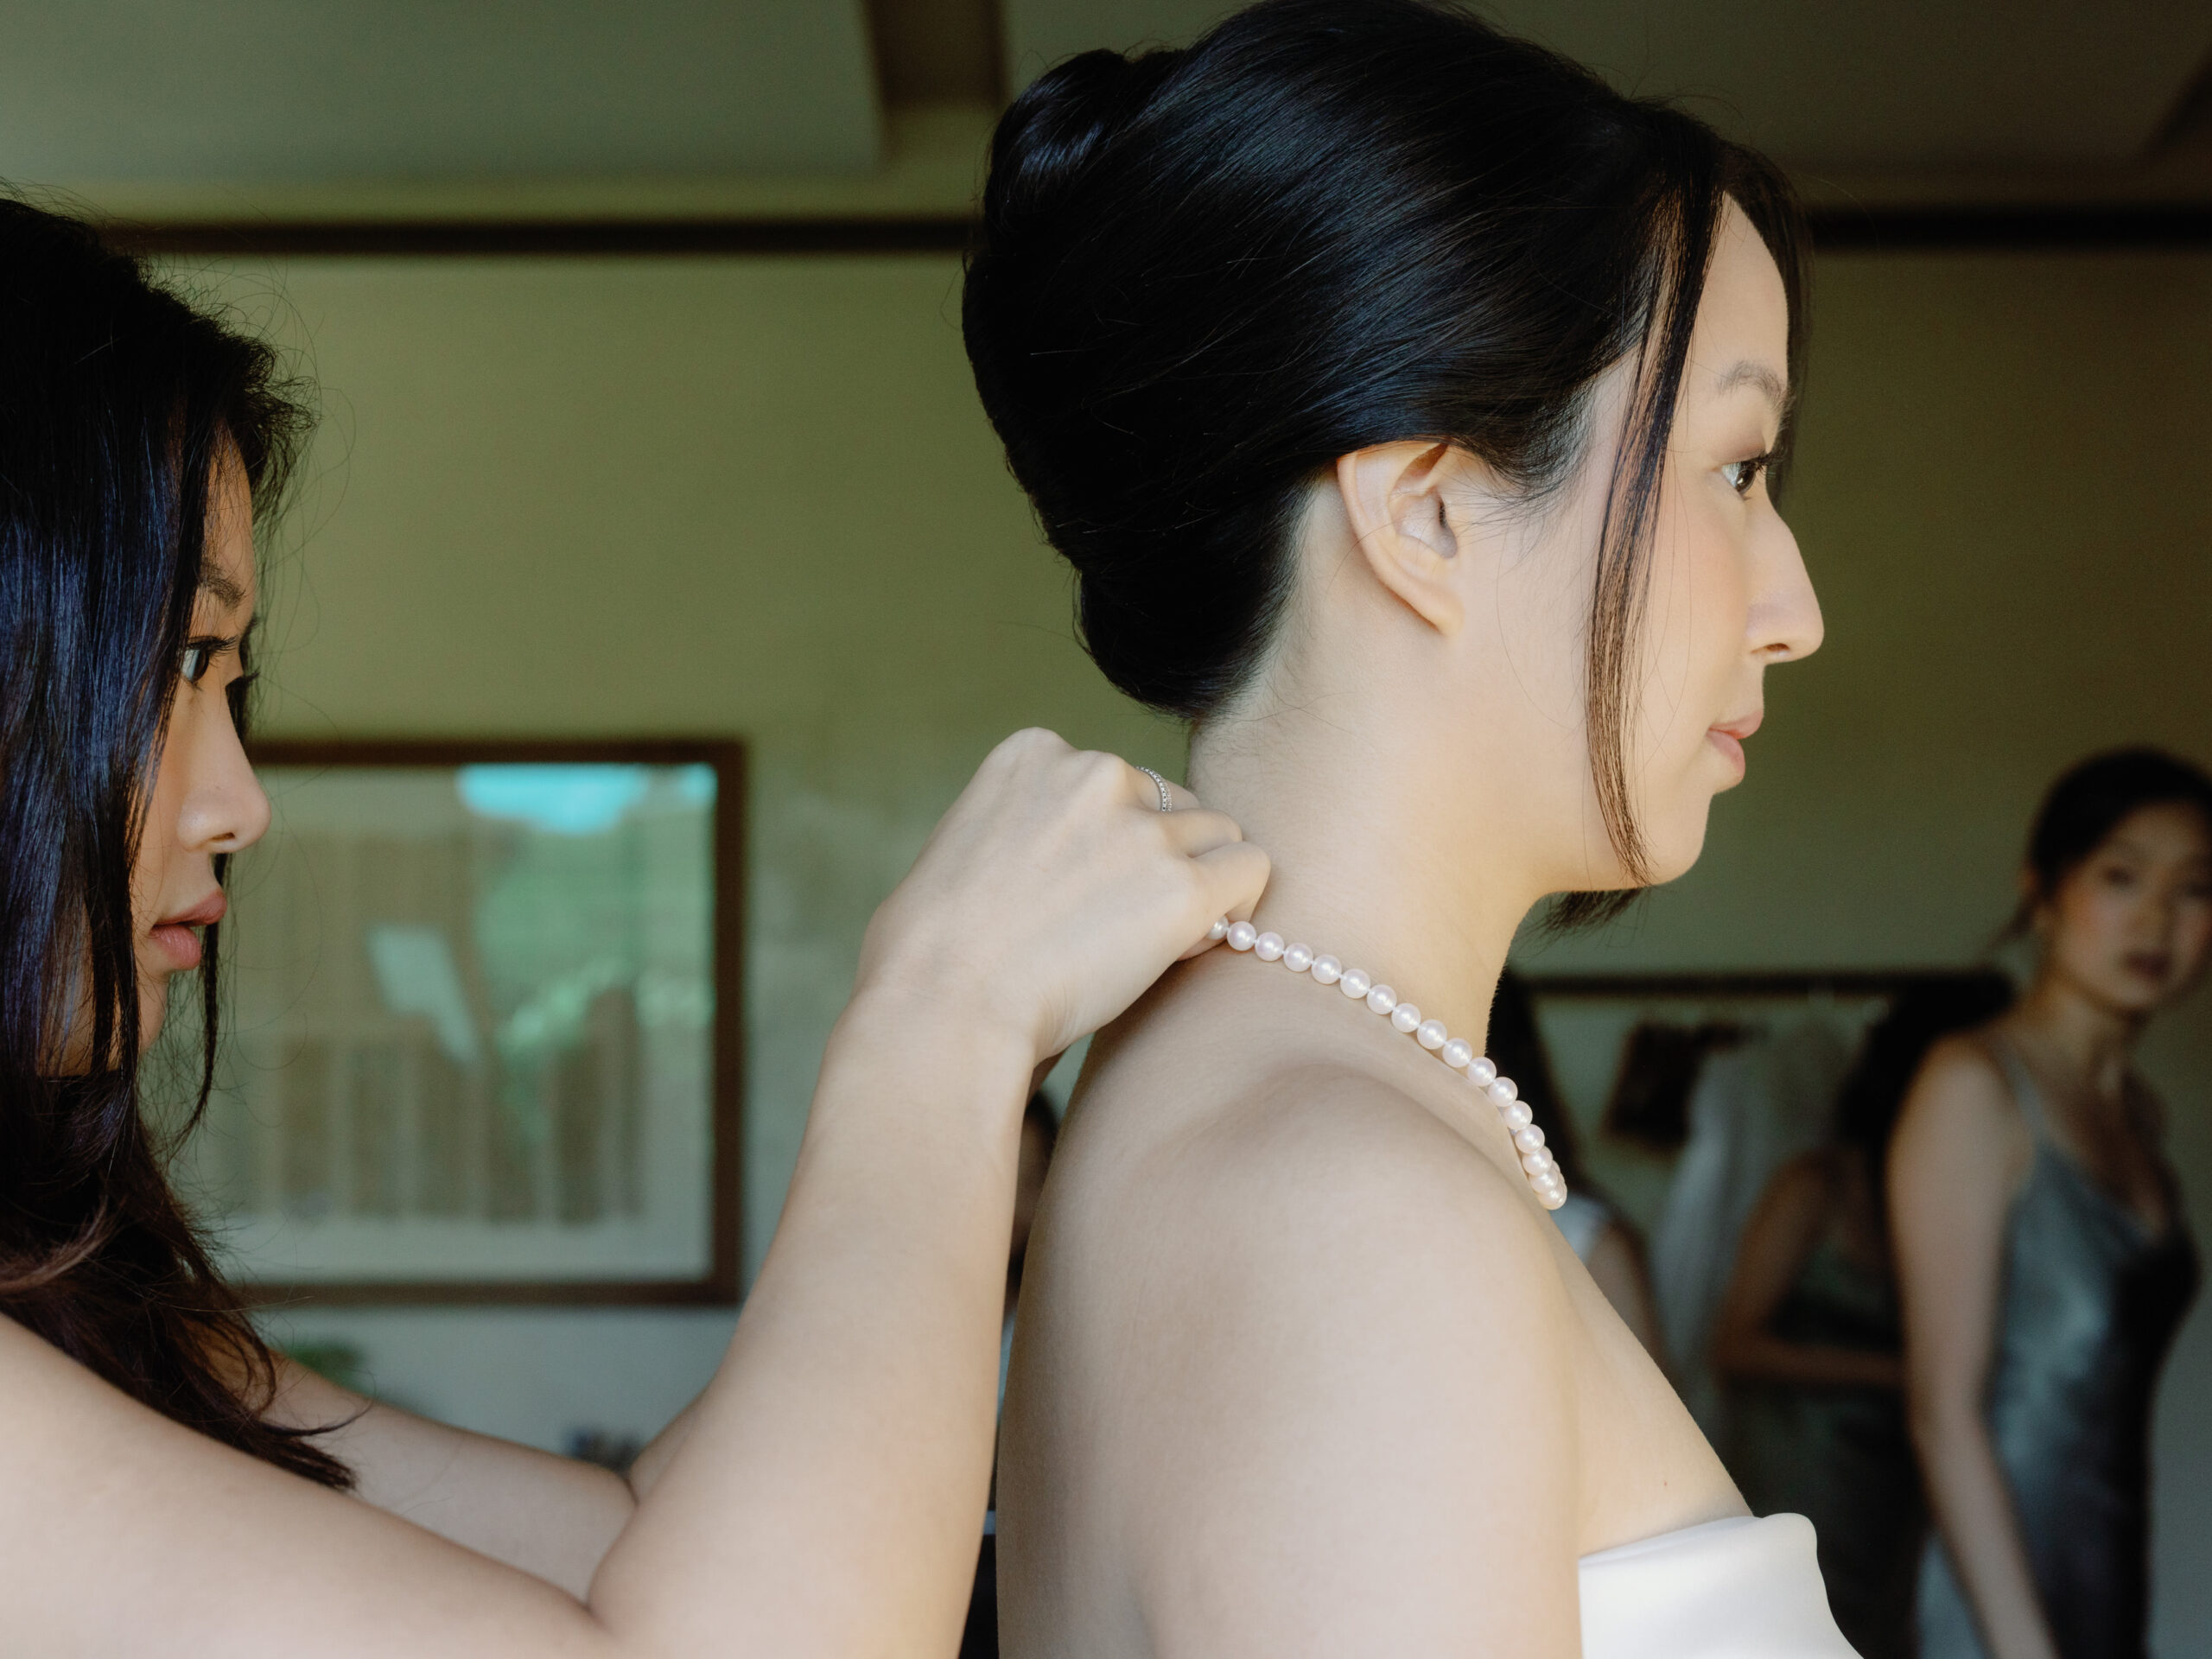 Getting ready photo of the bride. Candid image by Jenny Fu Studio